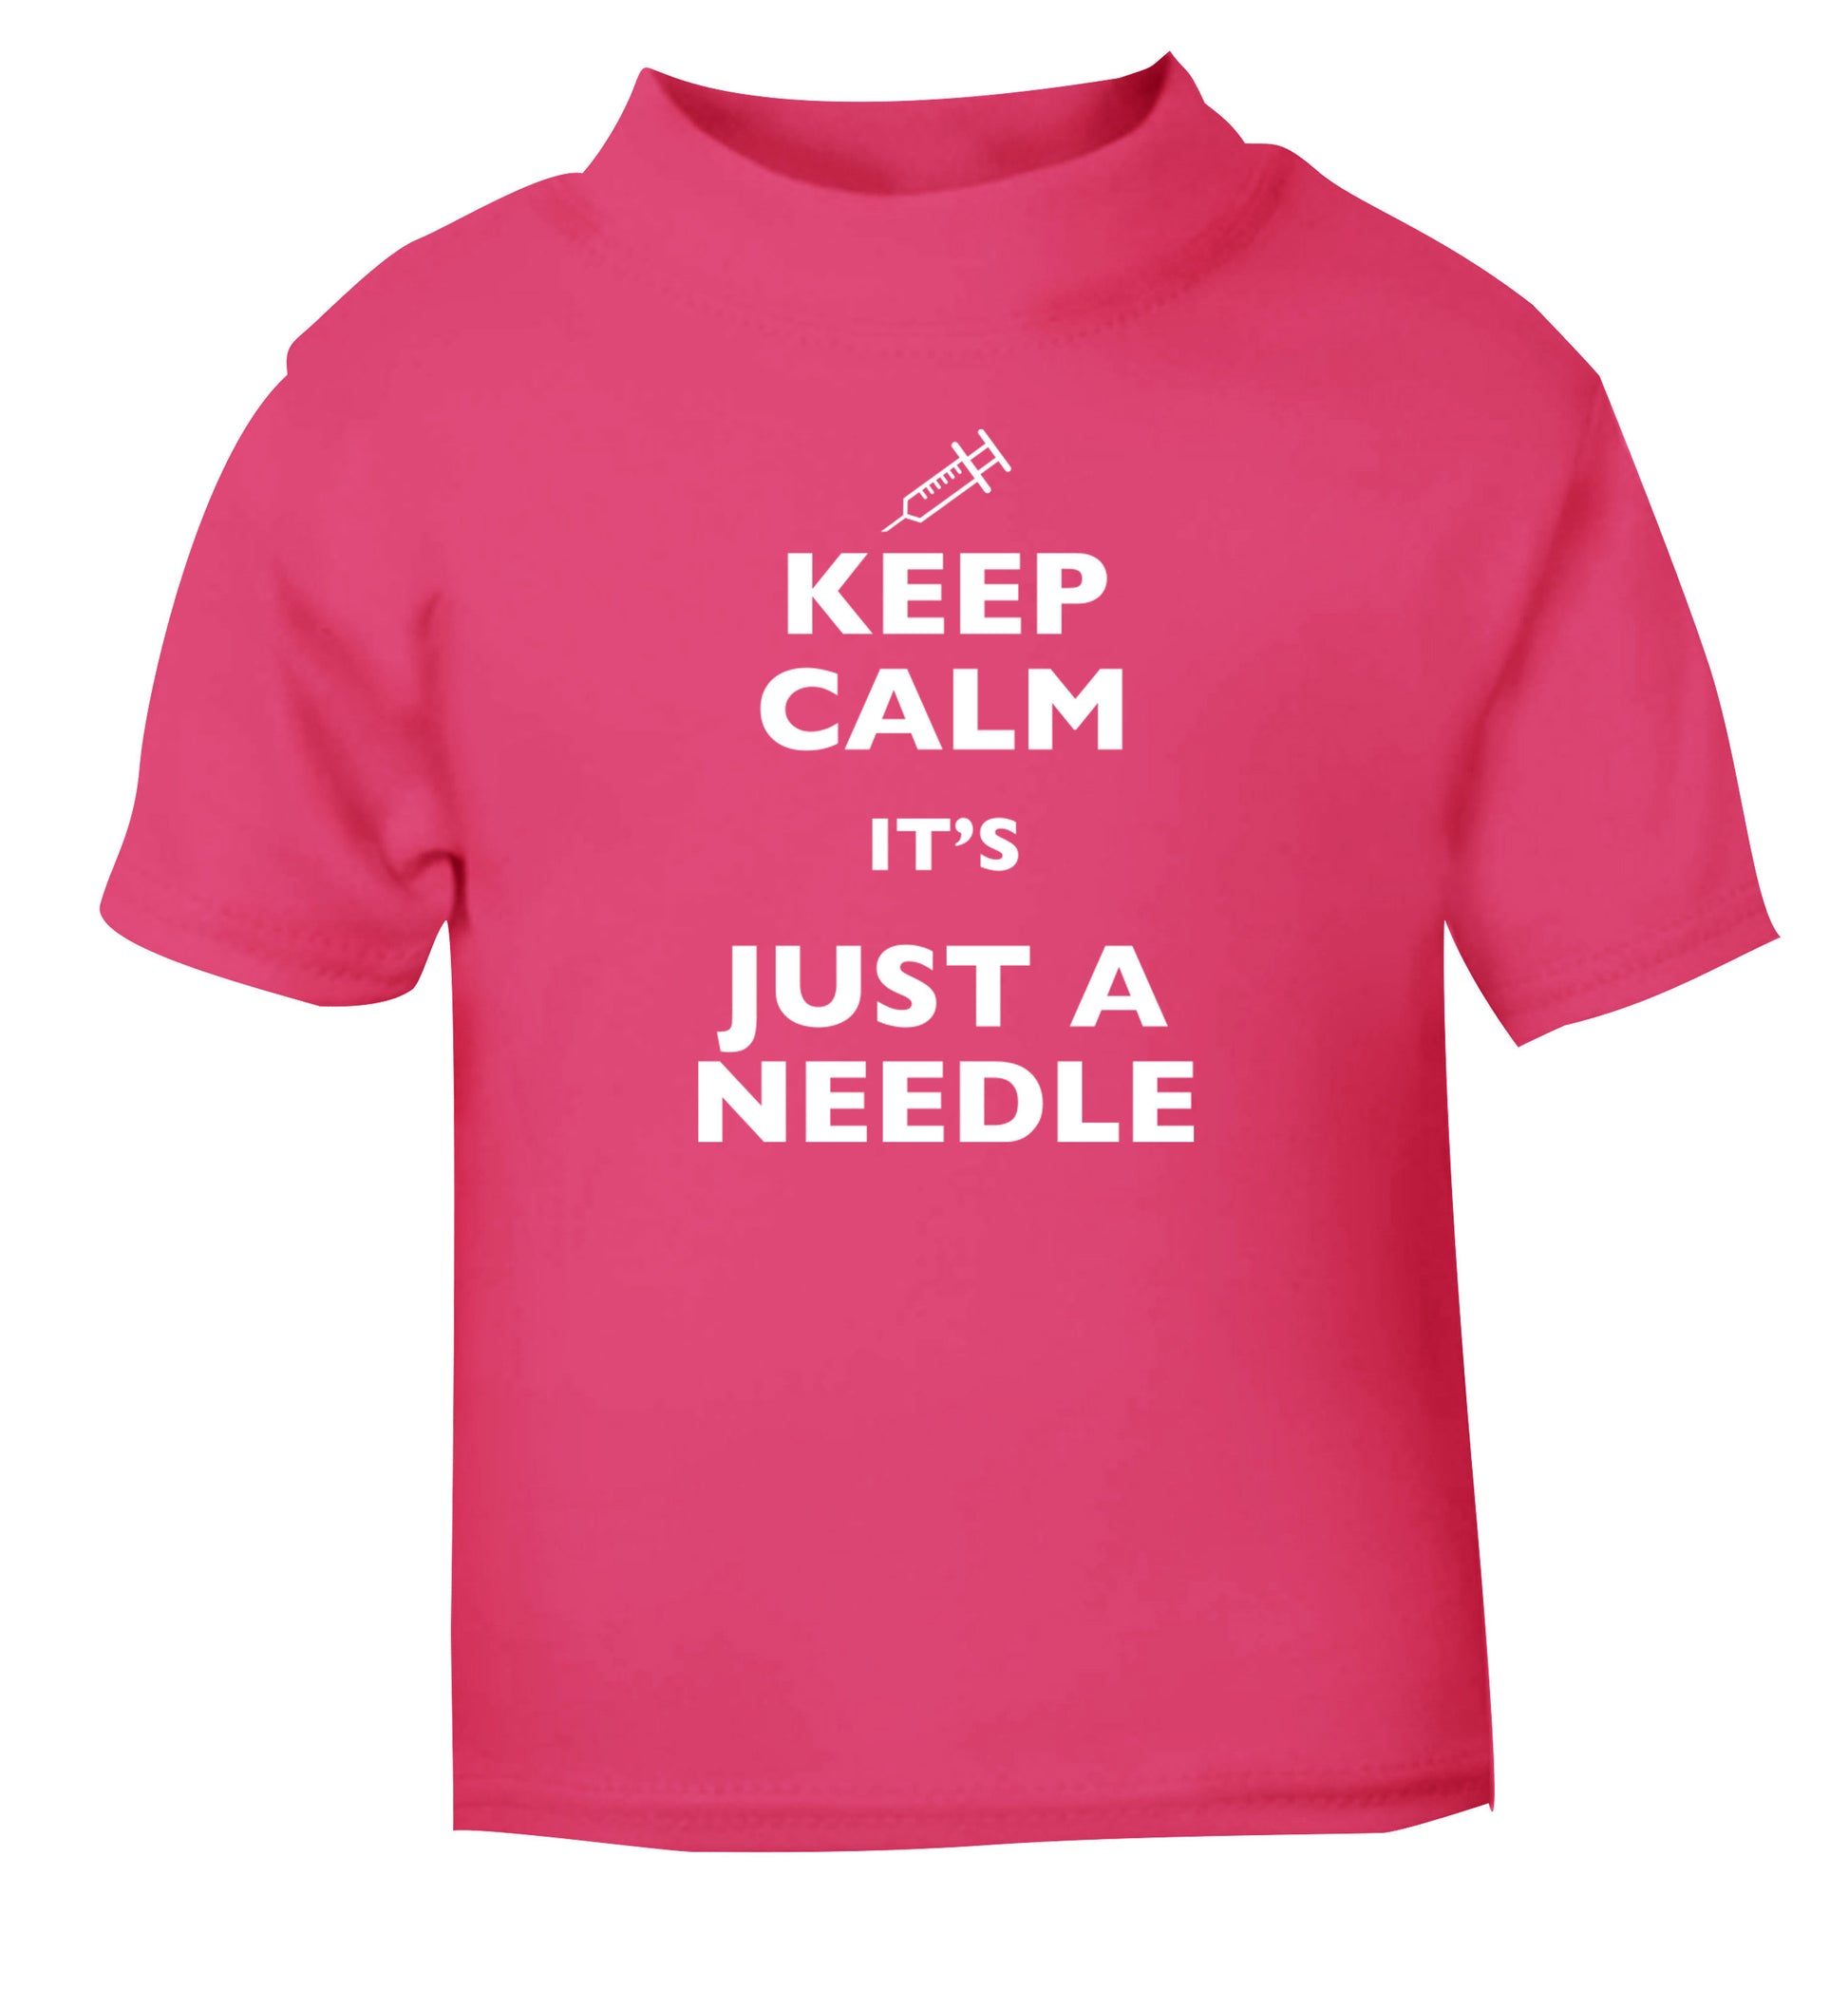 Keep calm it's only a needle pink Baby Toddler Tshirt 2 Years